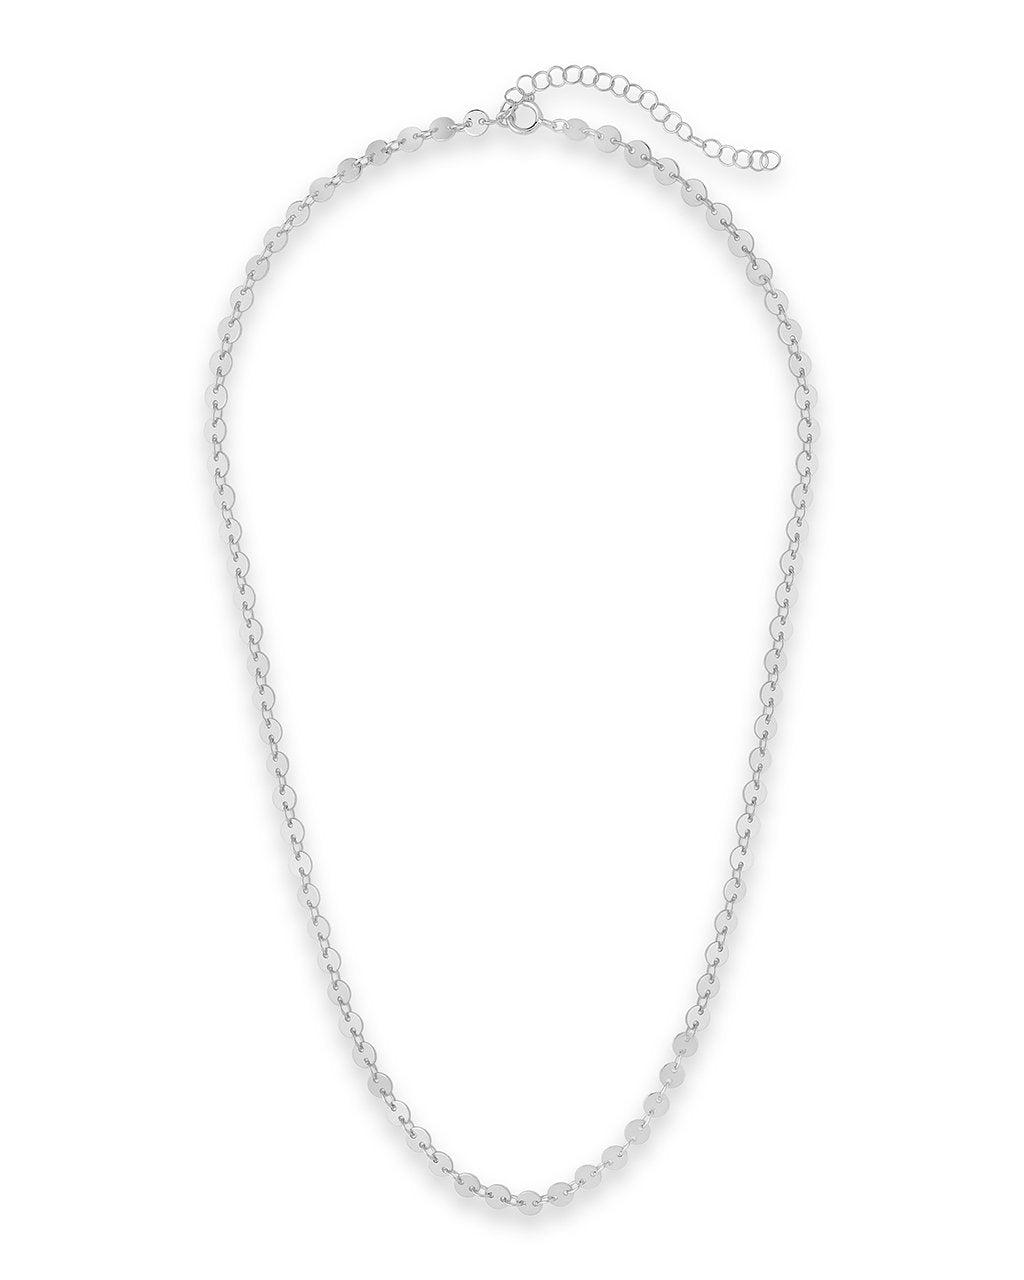 Mini Round Disk Chain Necklace - Sterling Forever